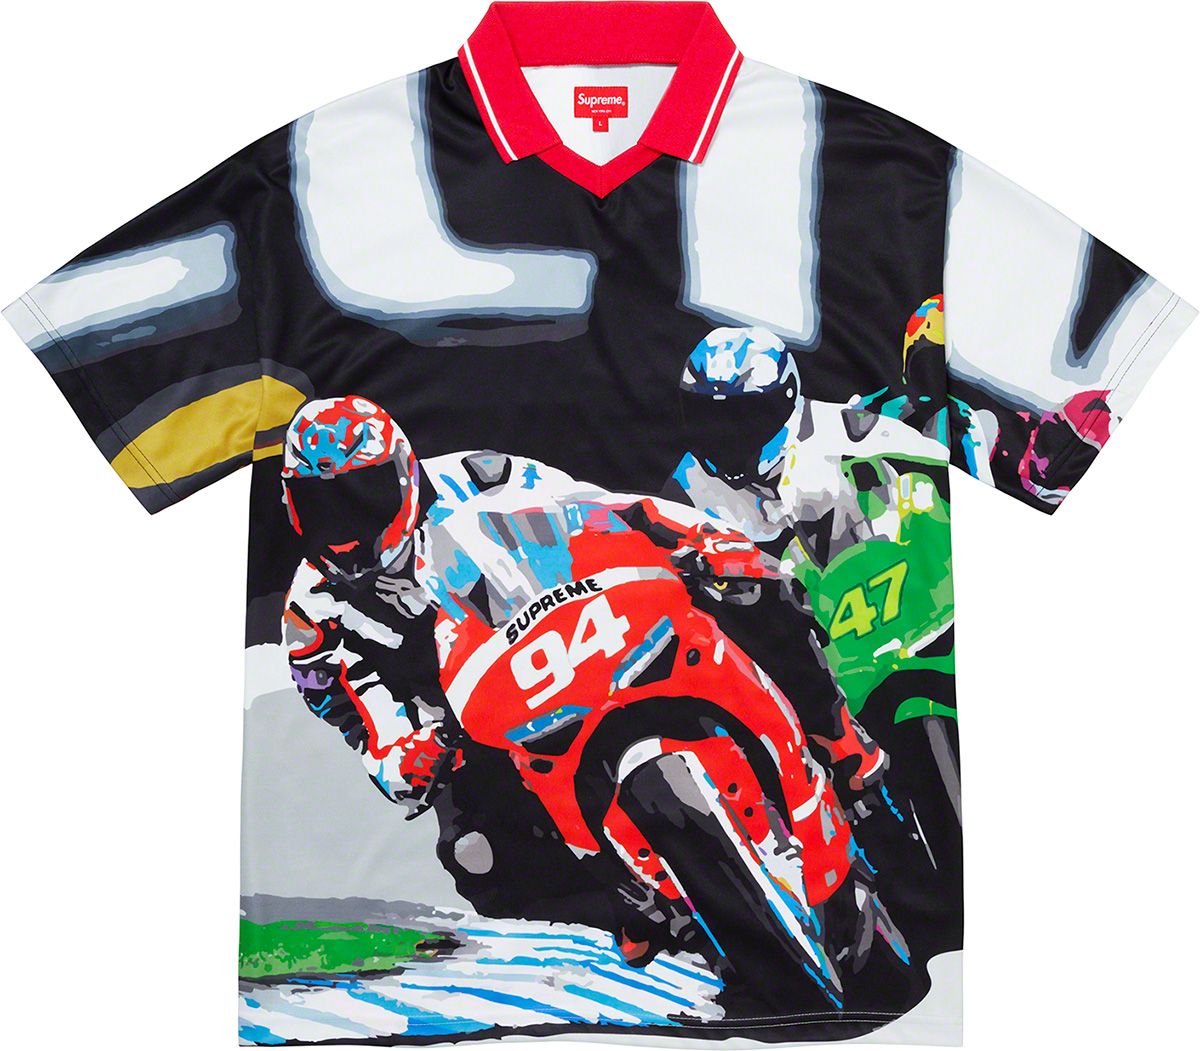 Supreme®/Castelli Cycling Jersey - Spring/Summer 2020 Preview